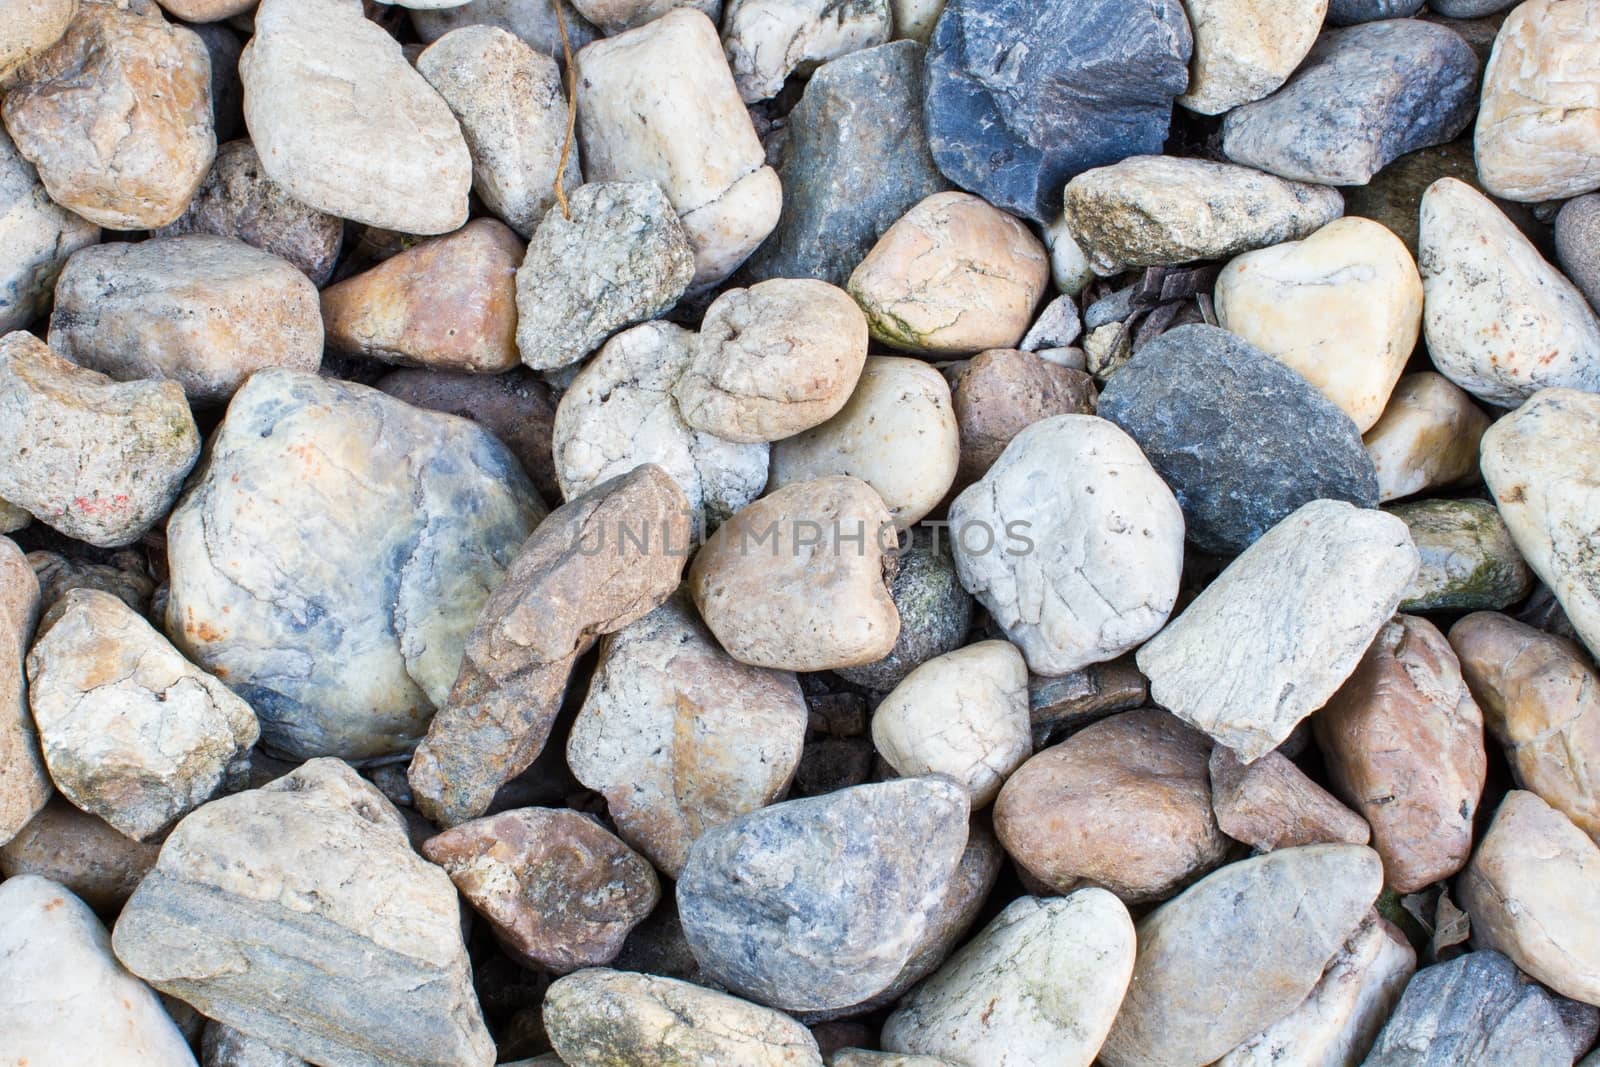 Pebbles as a background image on the ground